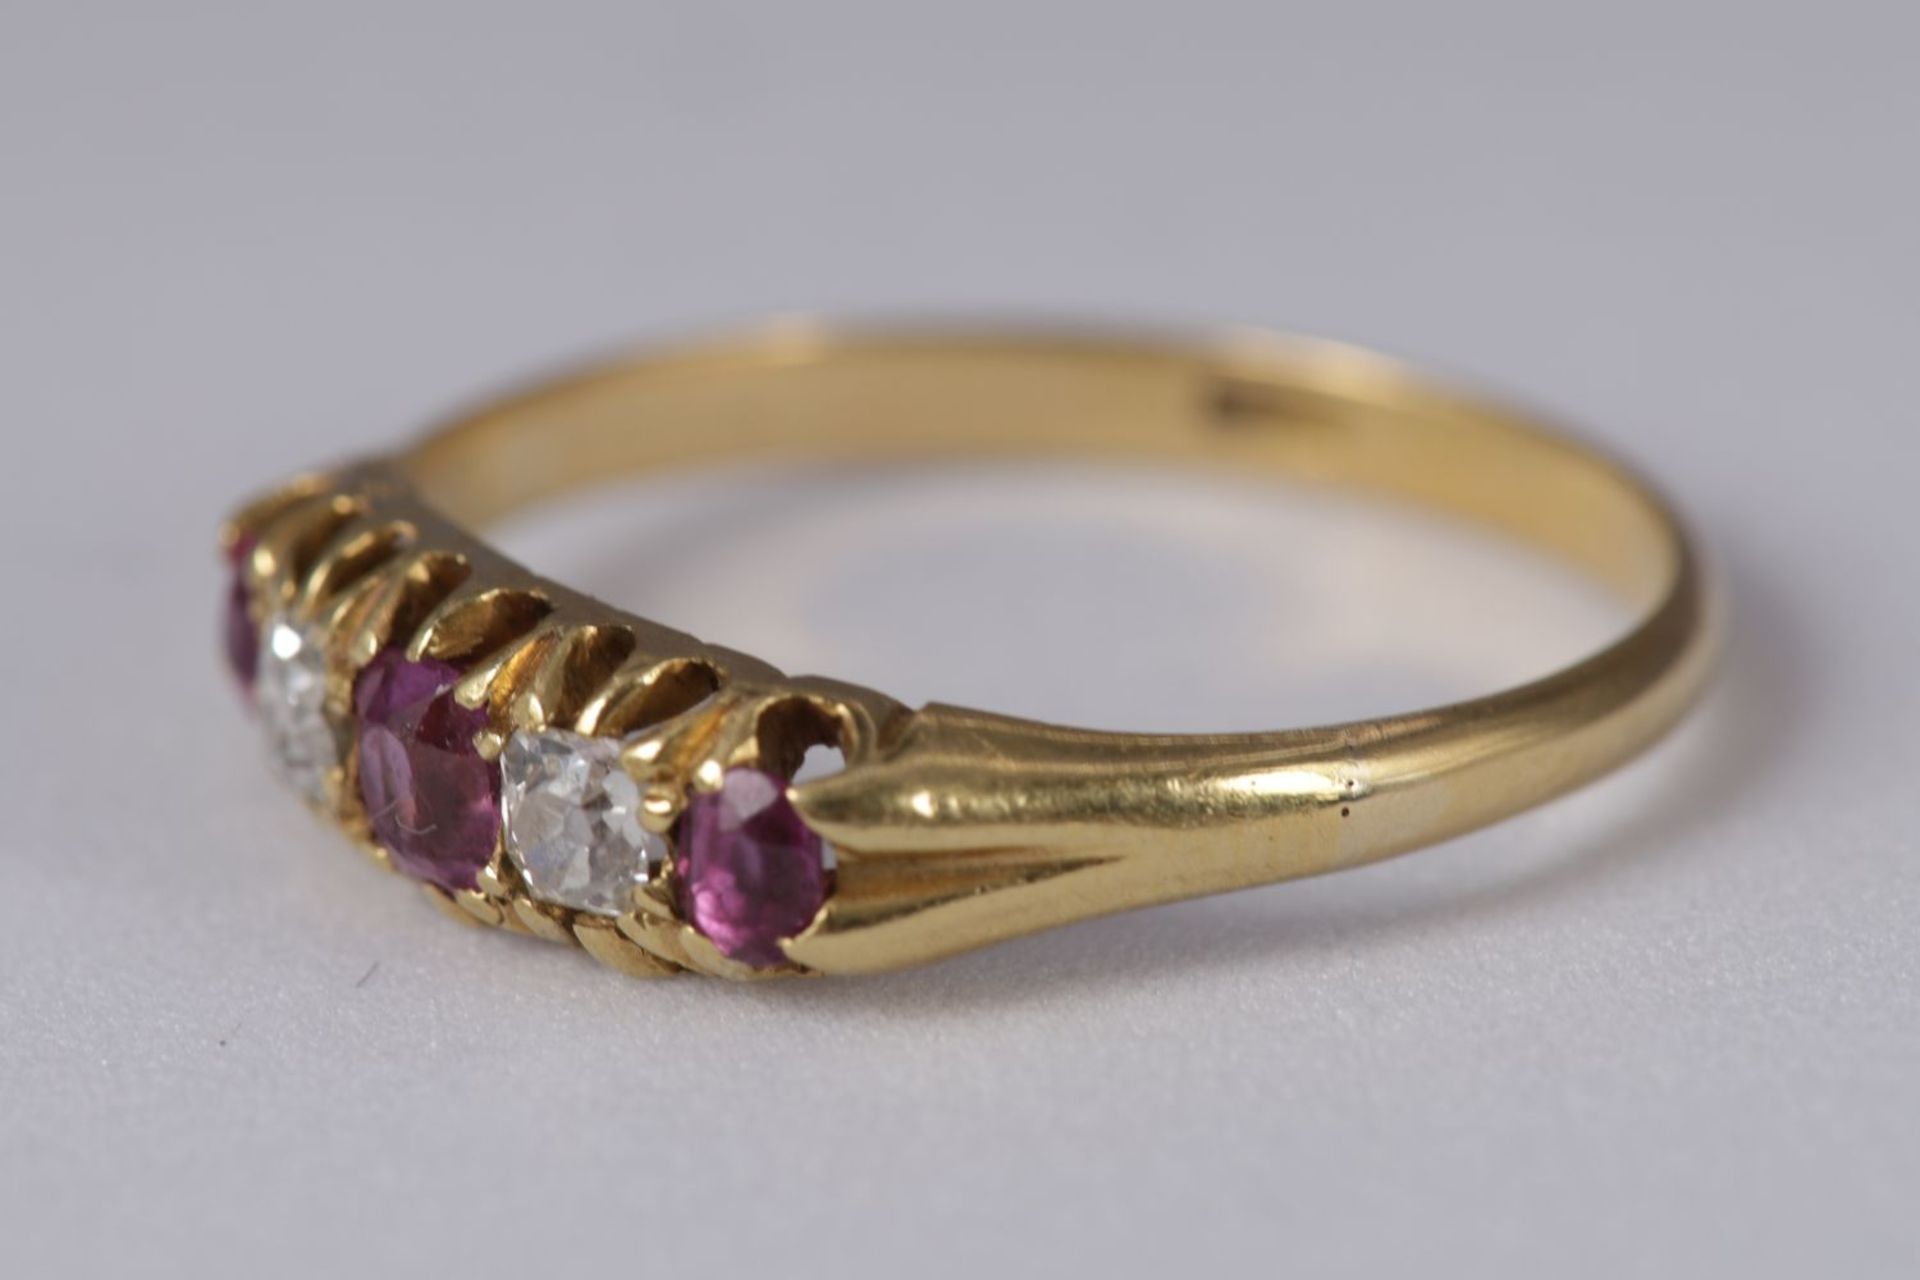 ANTIQUE 18K YELLOW GOLD, RUBY & DIAMOND RING - Image 2 of 4